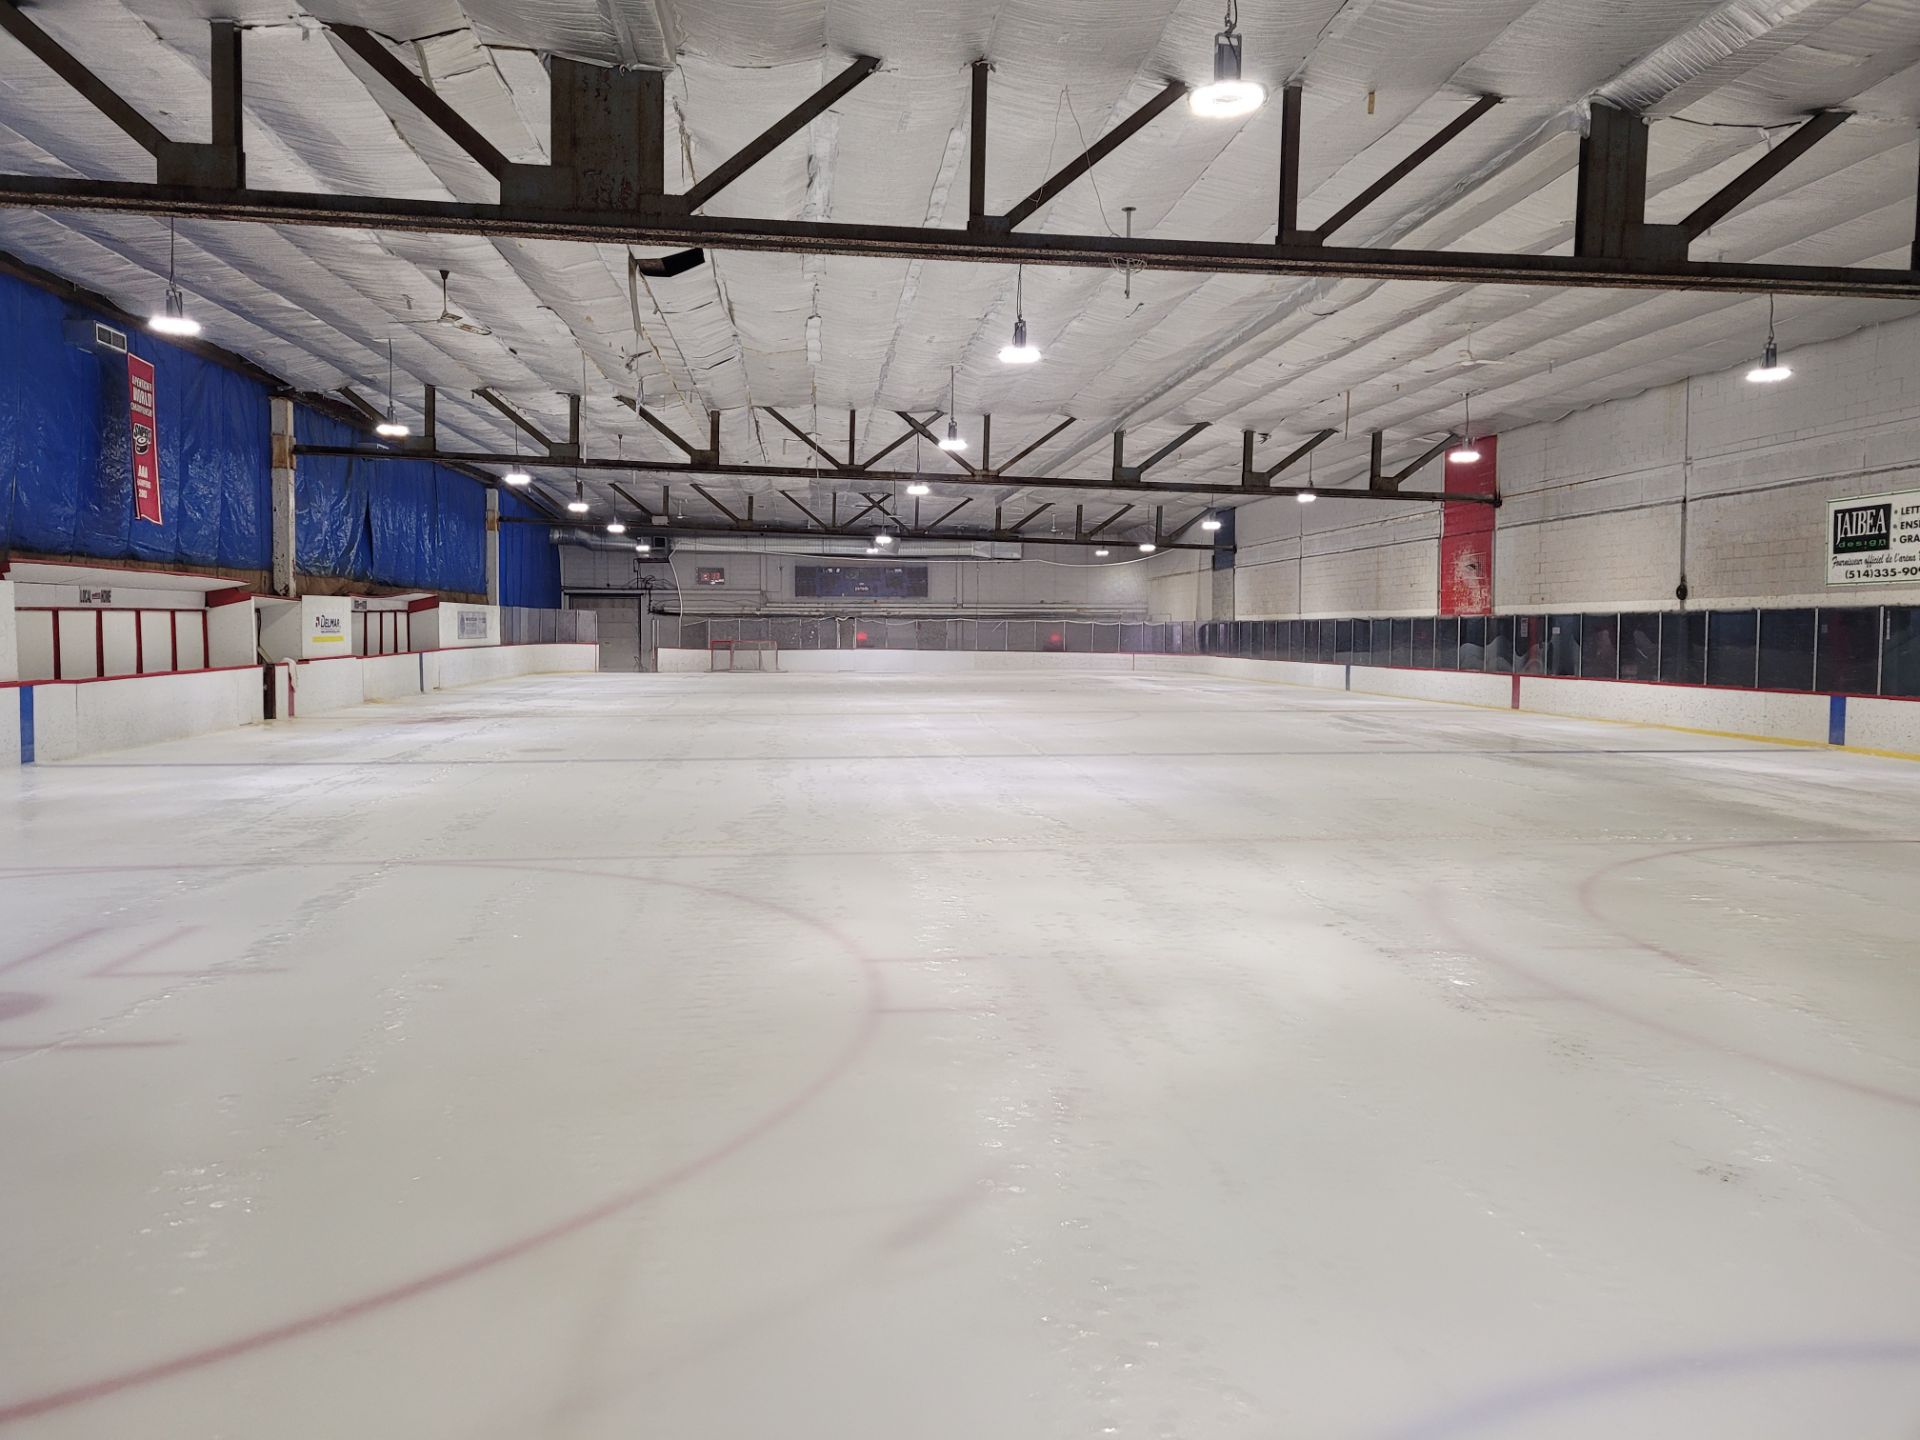 Online, Timed Auction Coming Soon - Complete Assets of the Bonaventure Hockey Arena Sports Facility - Image 2 of 86